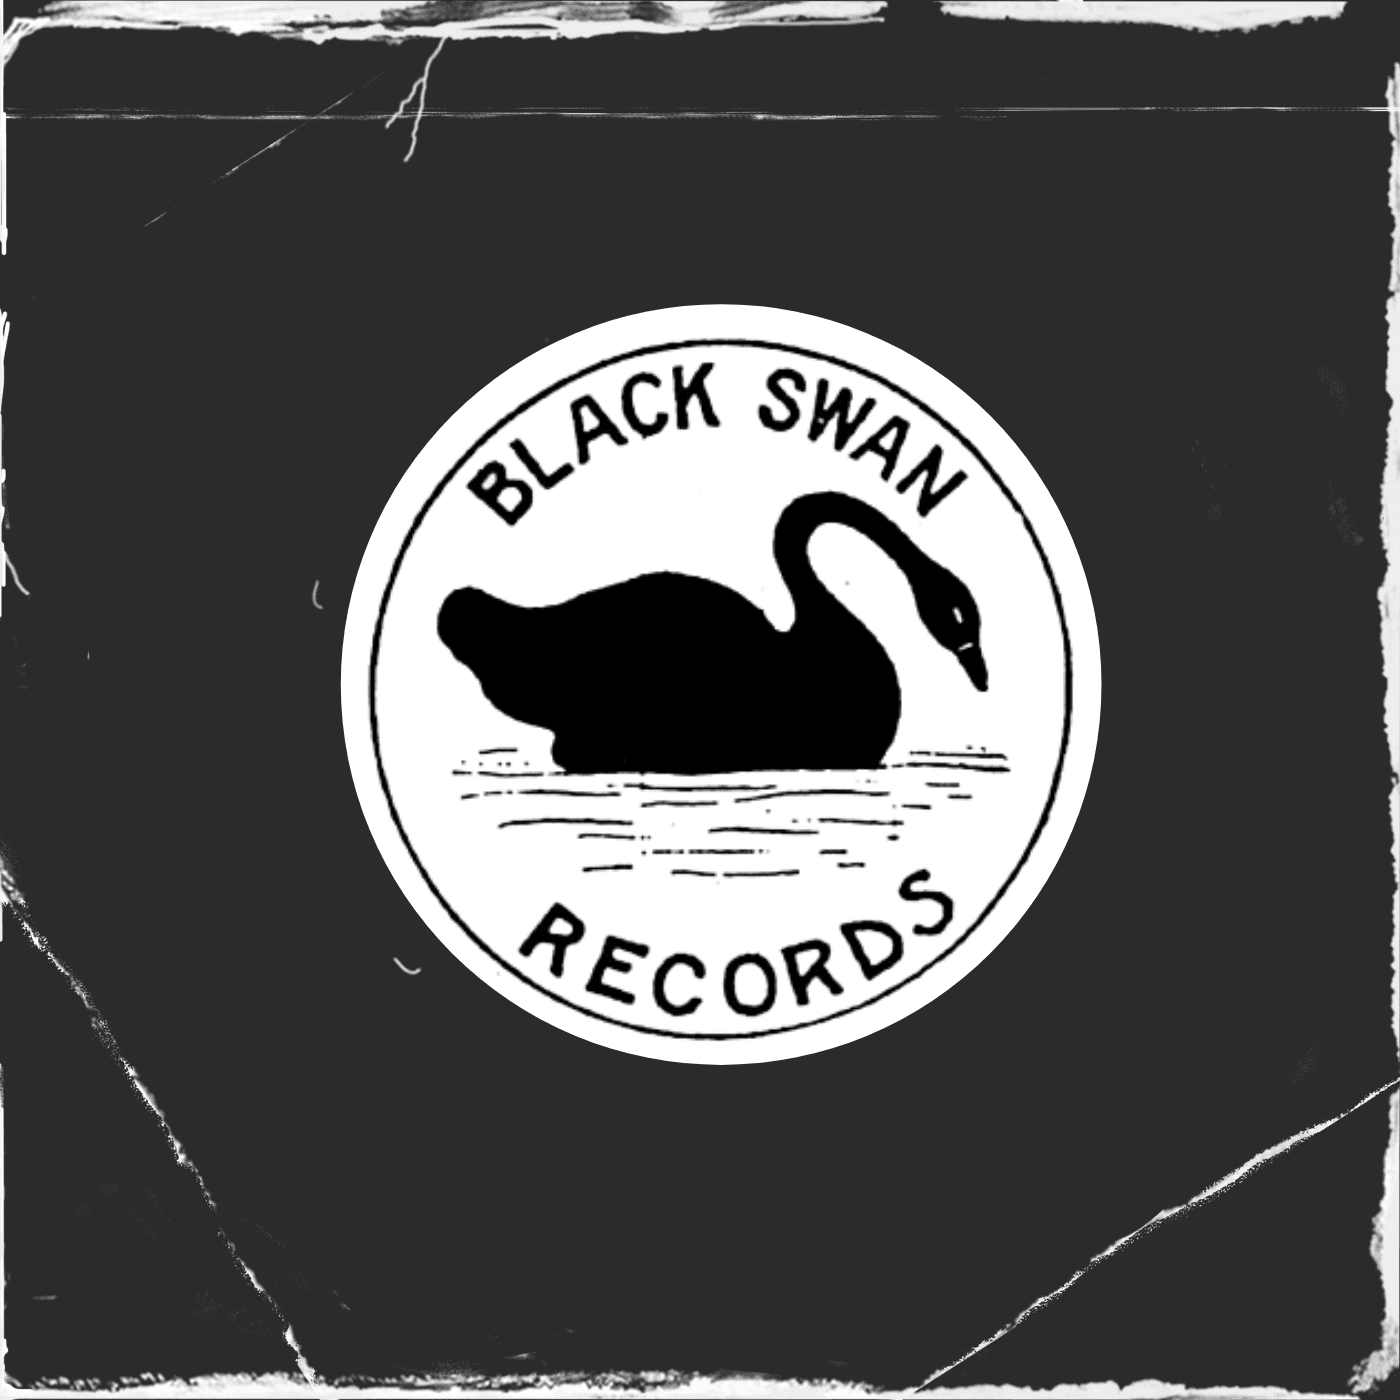 Thumbnail for "The Rise and Fall of Black Swan Records".